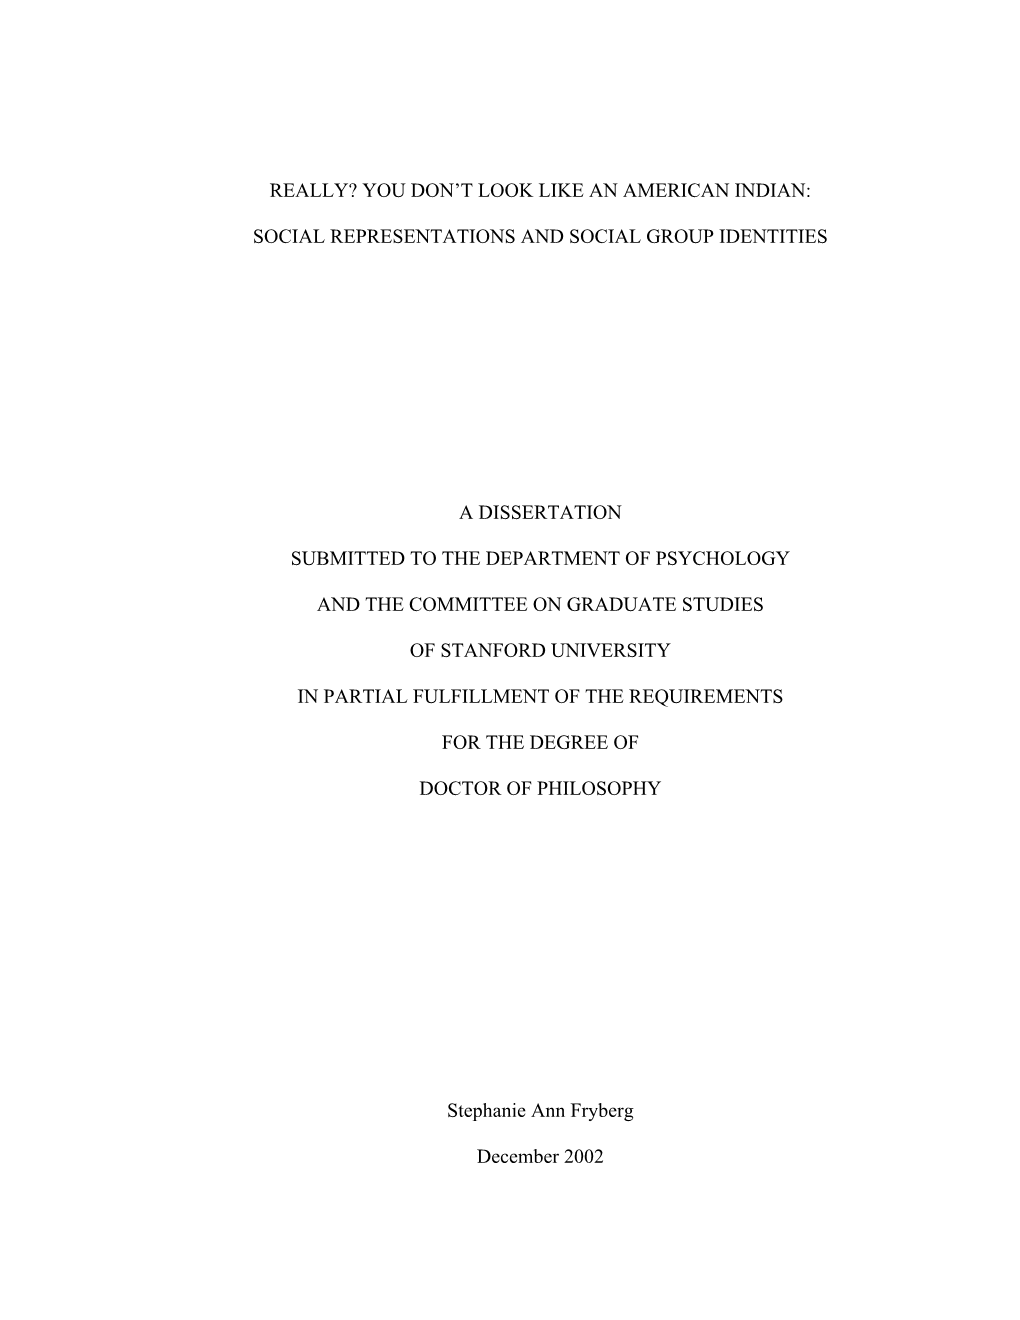 Really? You Don't Look Like an American Indian: Social Representations and Social Group Identities a Dissertation Submitted T